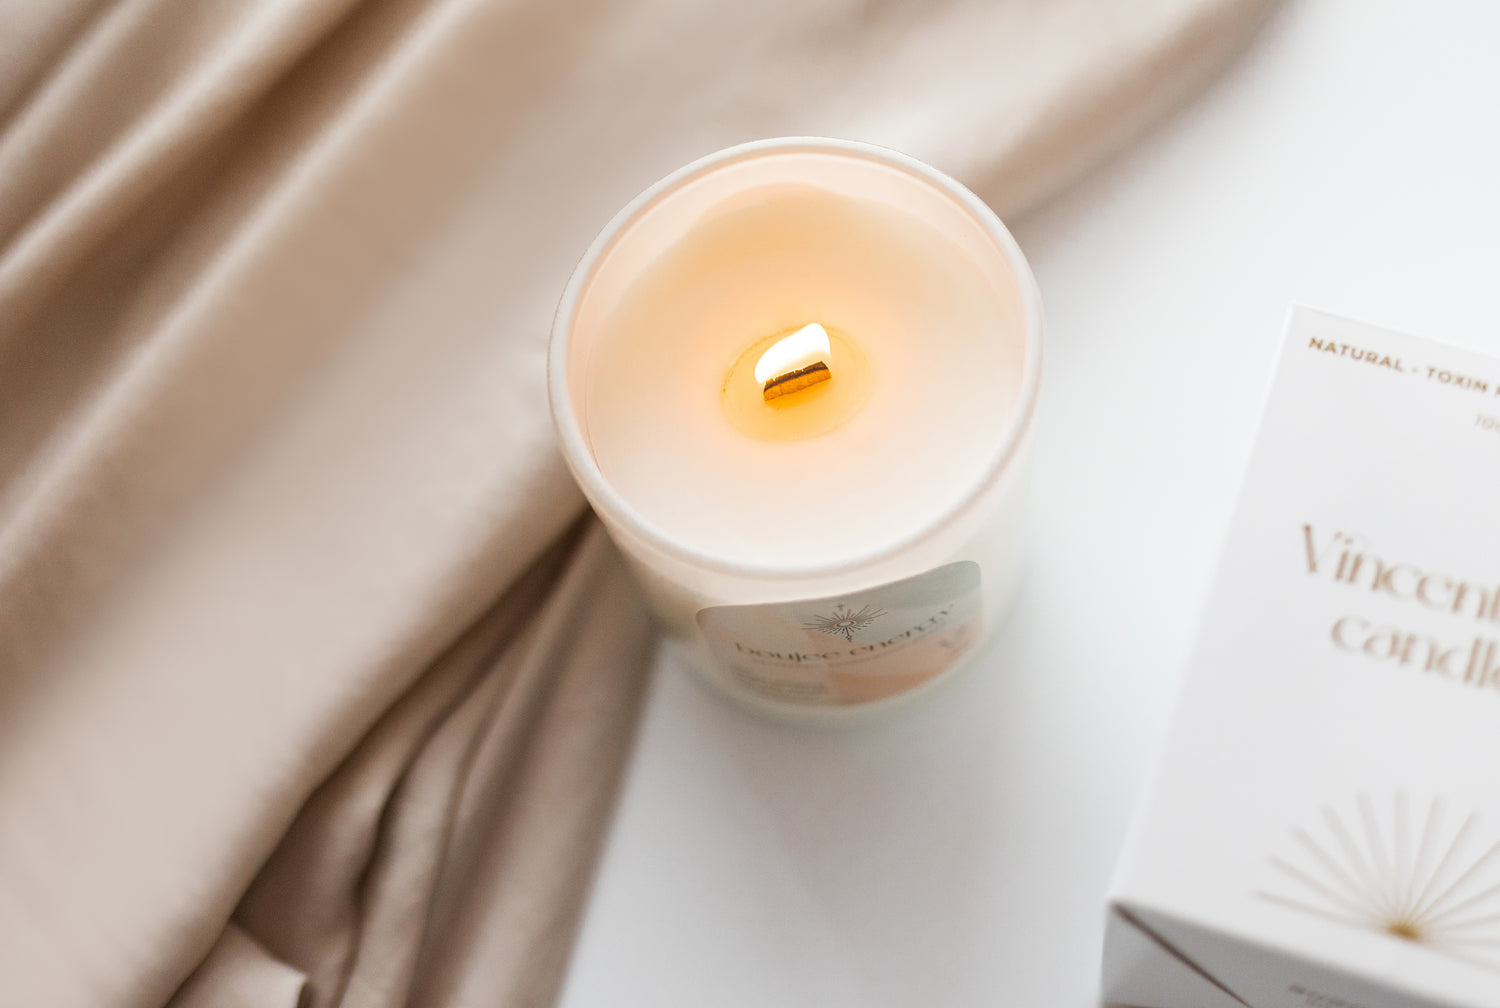 Boujee Energy coconut soy wax candle | Grapefruit, sandalwood, amber - Vincent Land Candle Co.